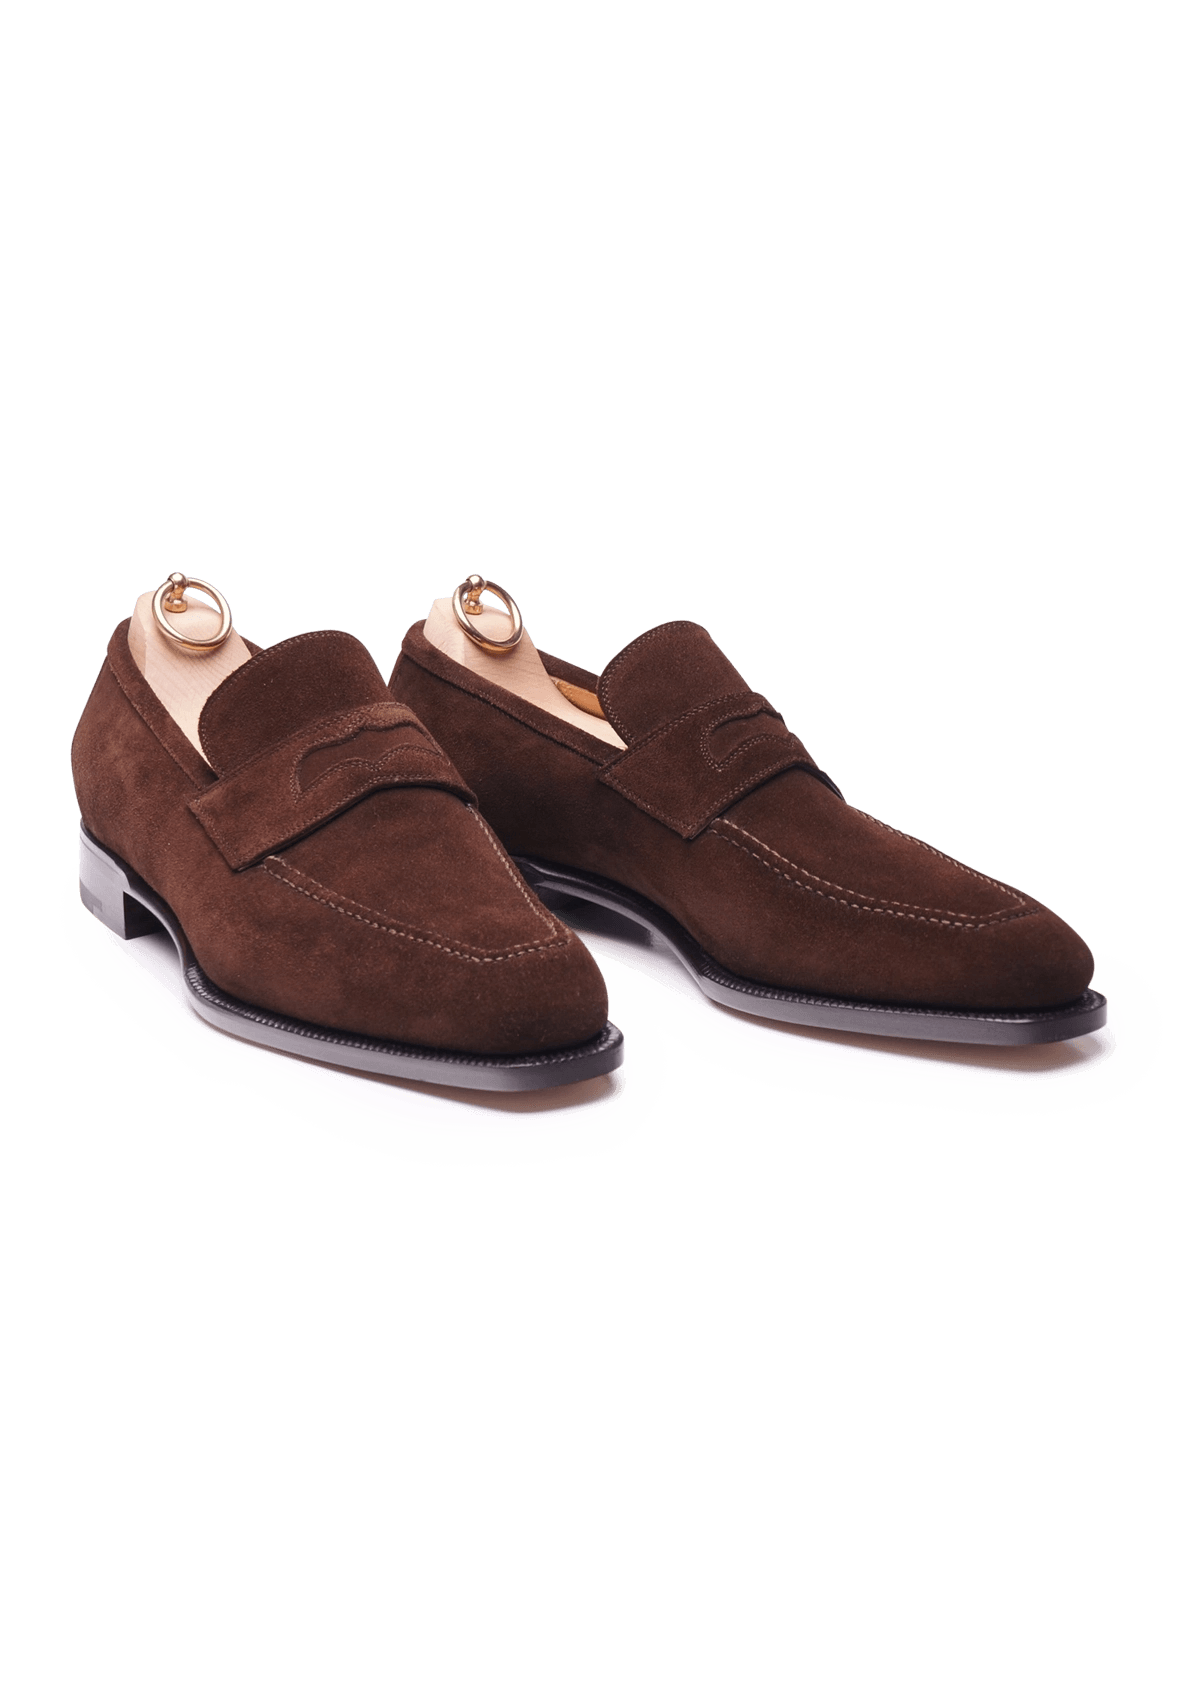 Dark Brown Suede Penny Loafers